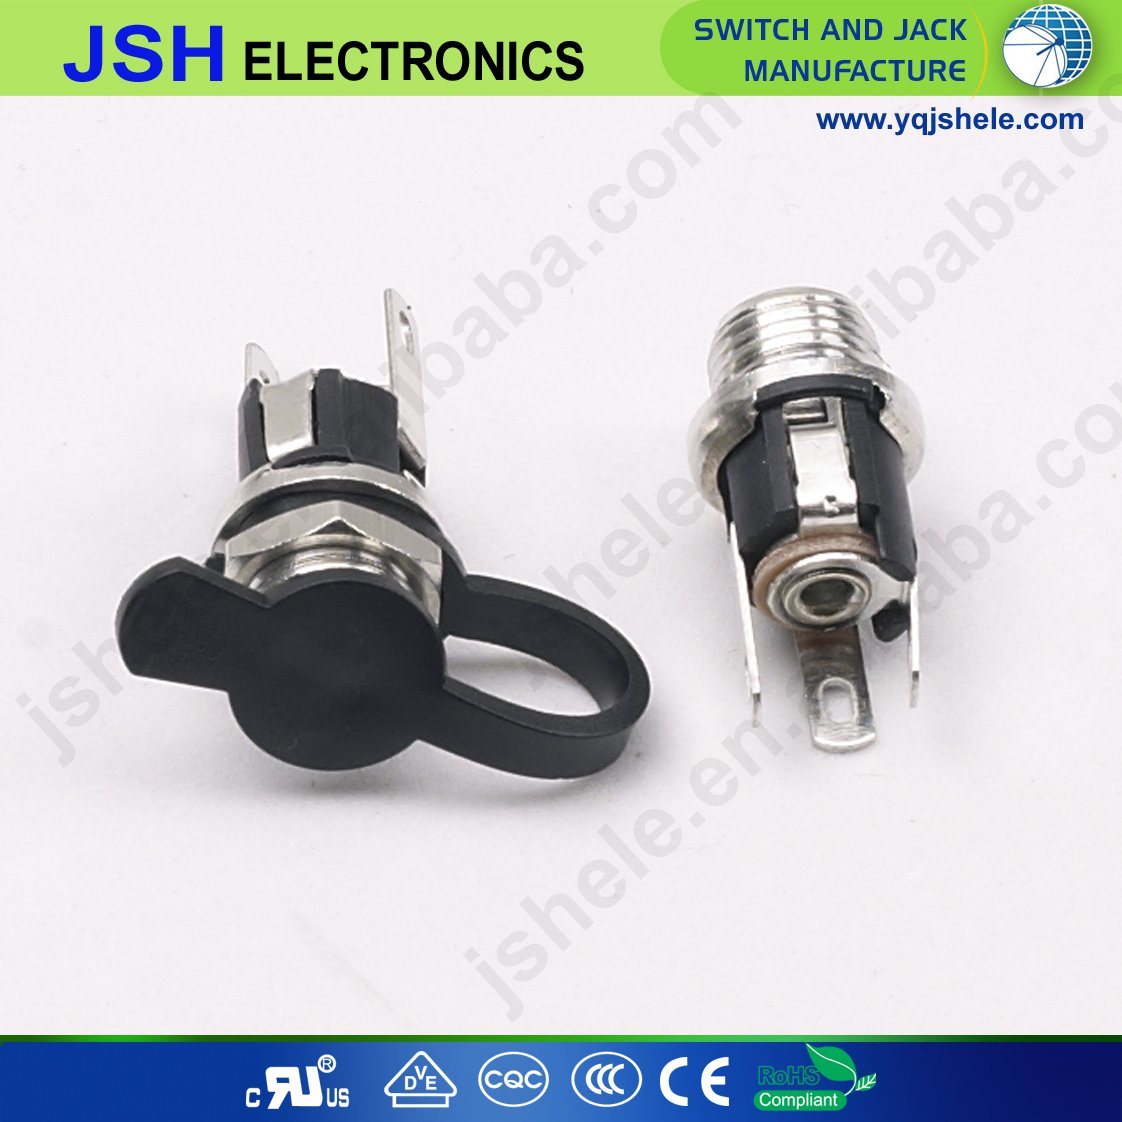 5.5mm X 2.1mm DC Power Supply Metal Jack Socket with Nut and Washer